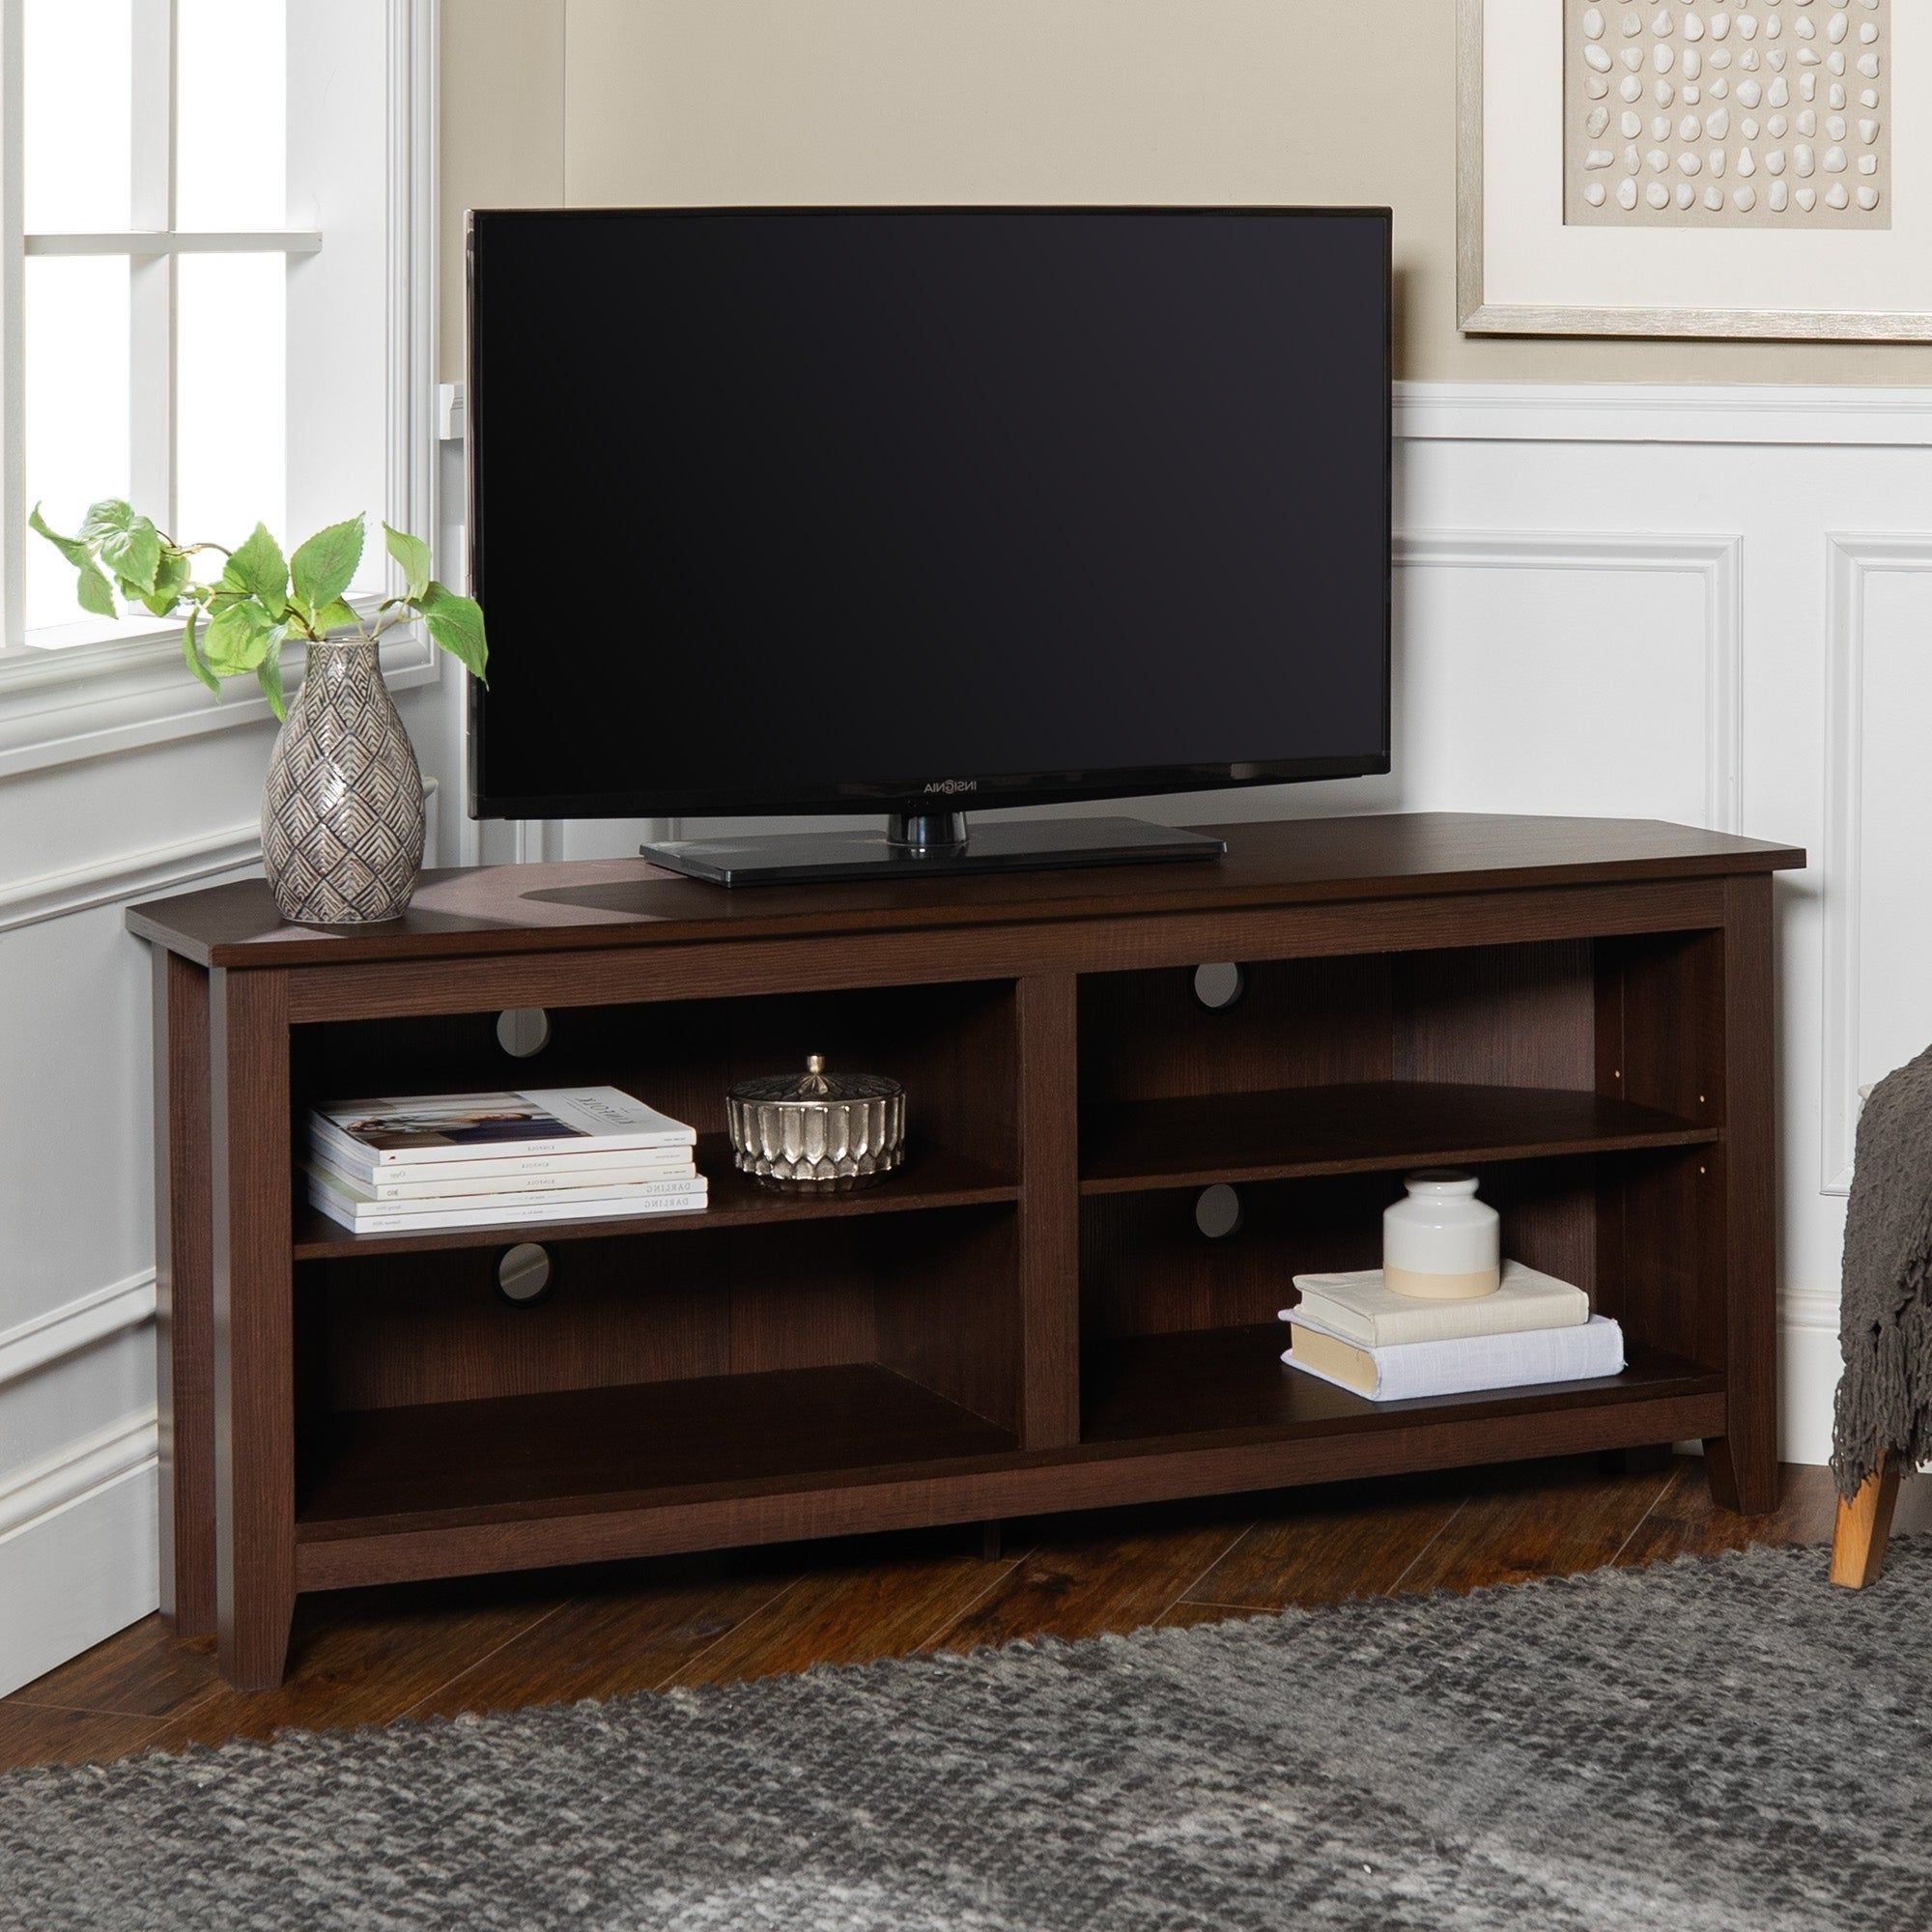 Porch & Den Ogden 58 Inch Espresso Wood Corner Tv Stand Within Latest Jace Tv Stands For Tvs Up To 58" (View 1 of 20)